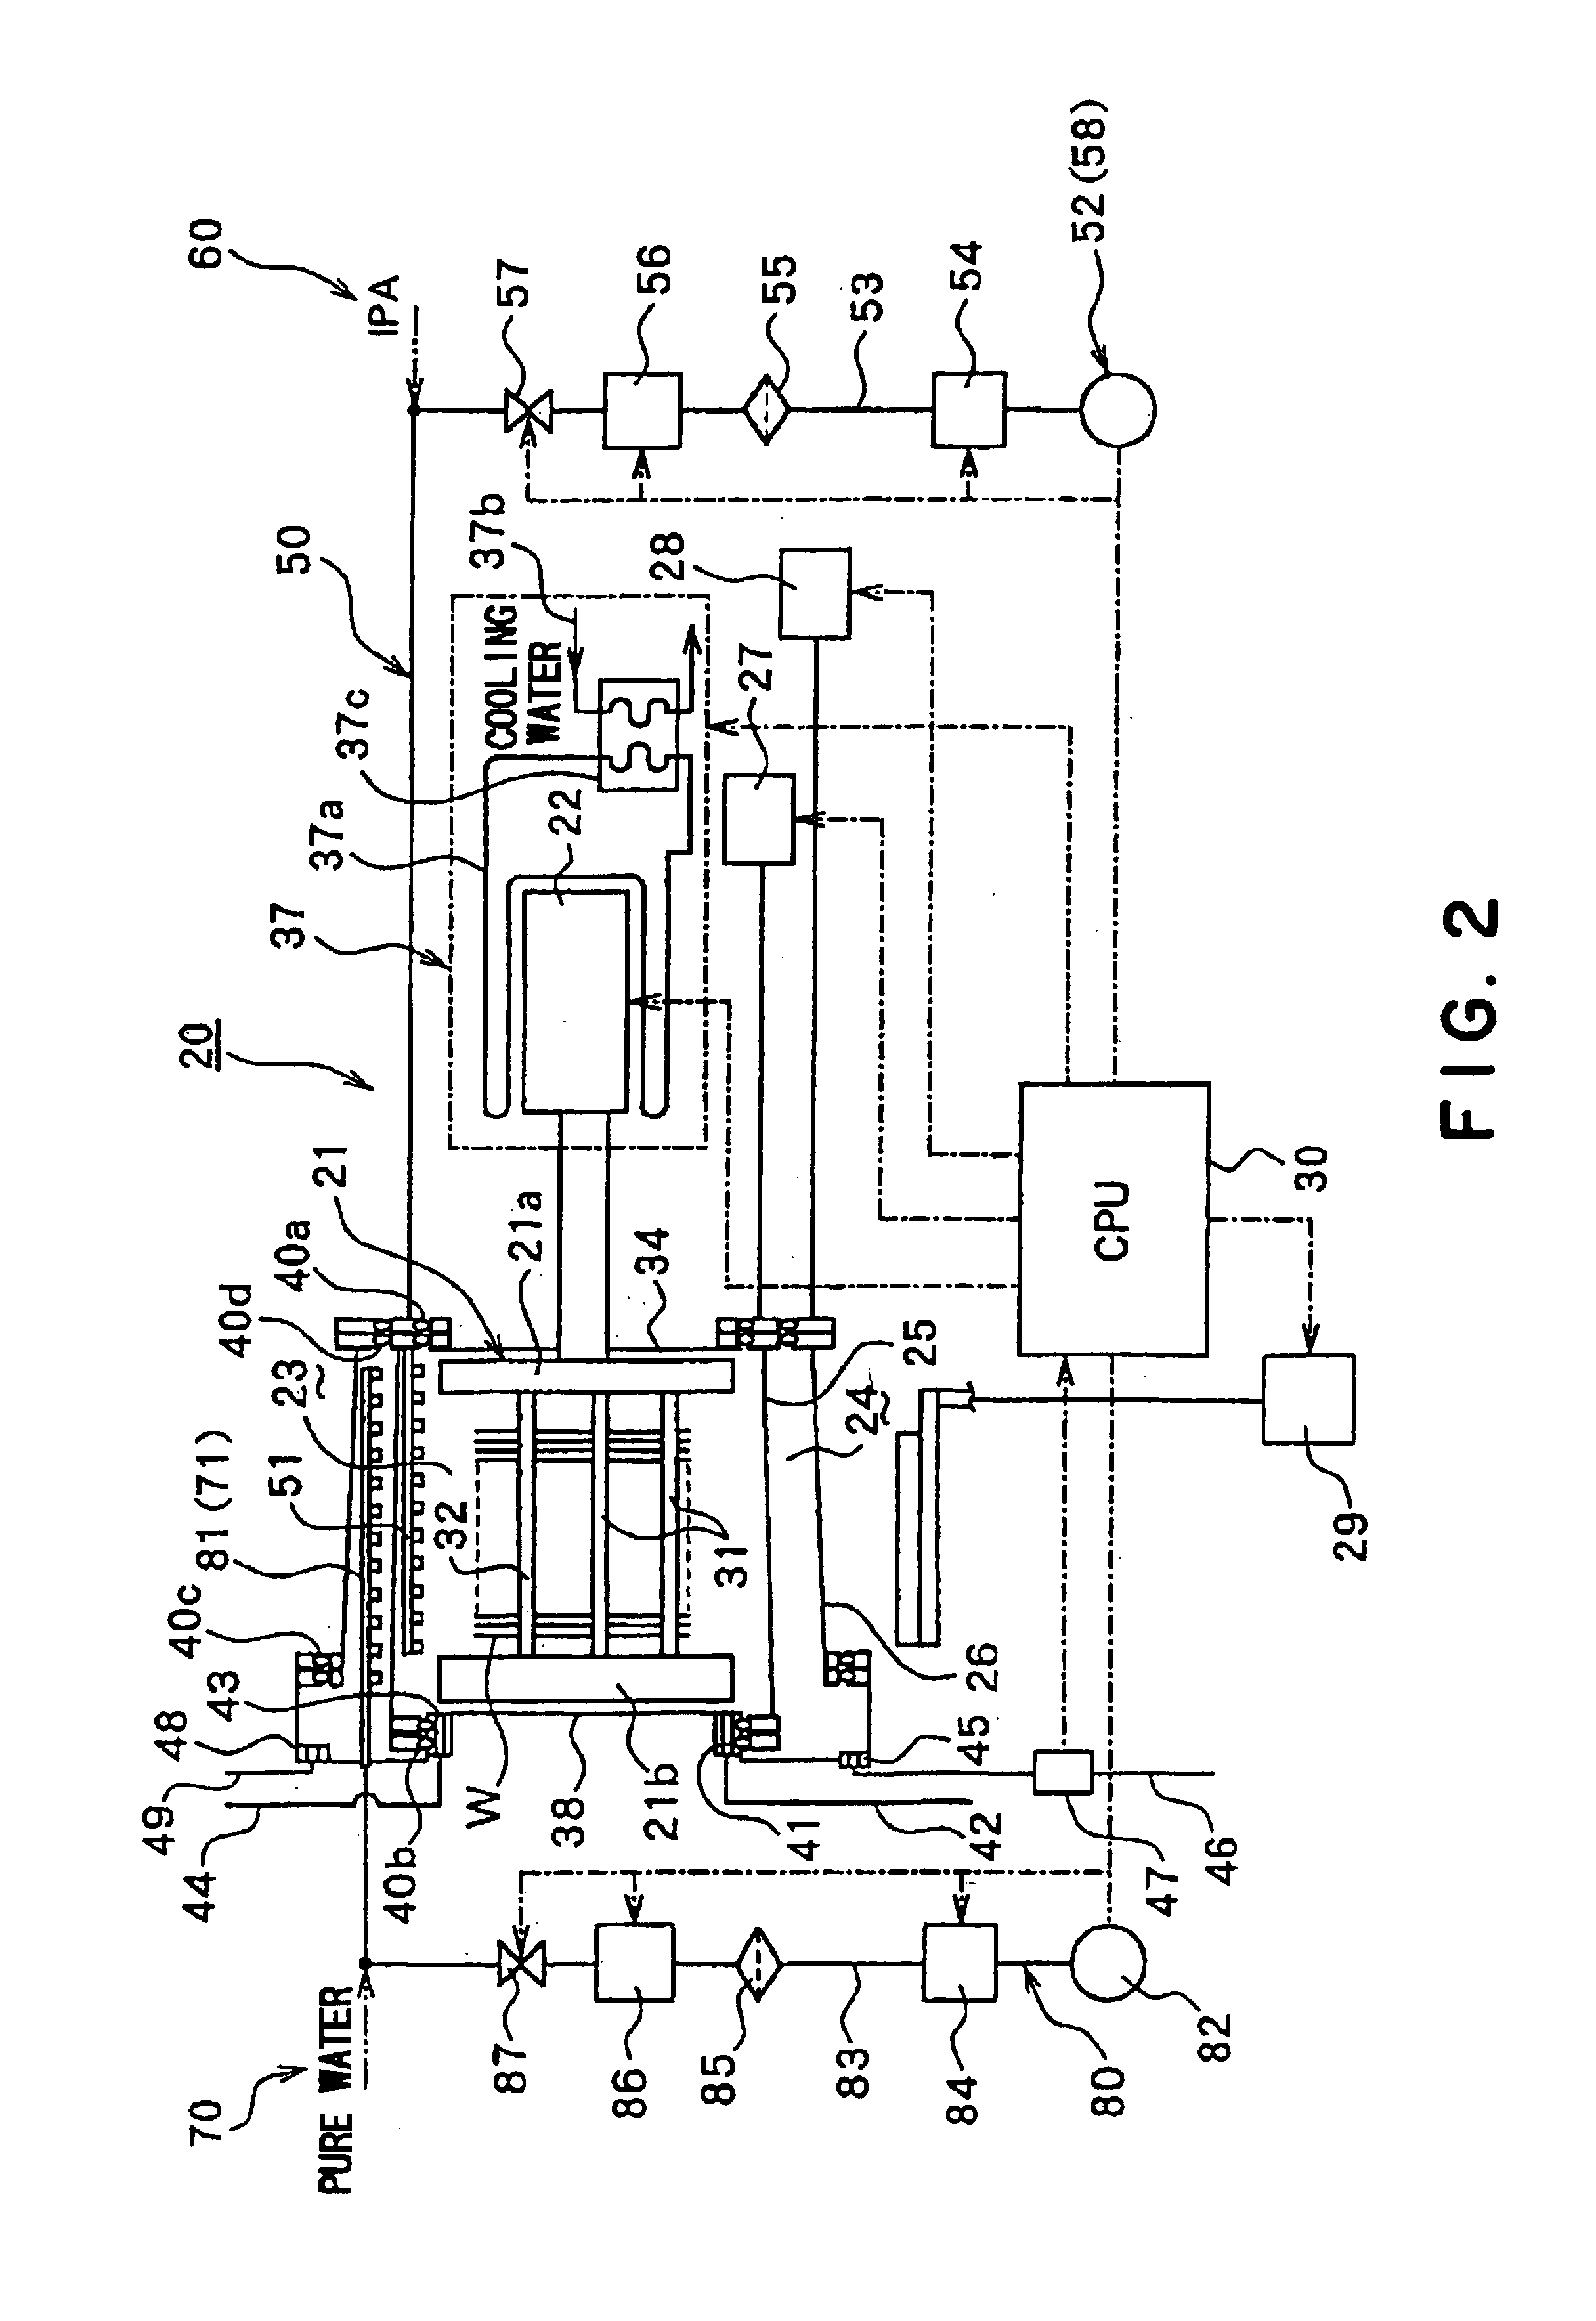 Processing apparatus with sealing mechanism